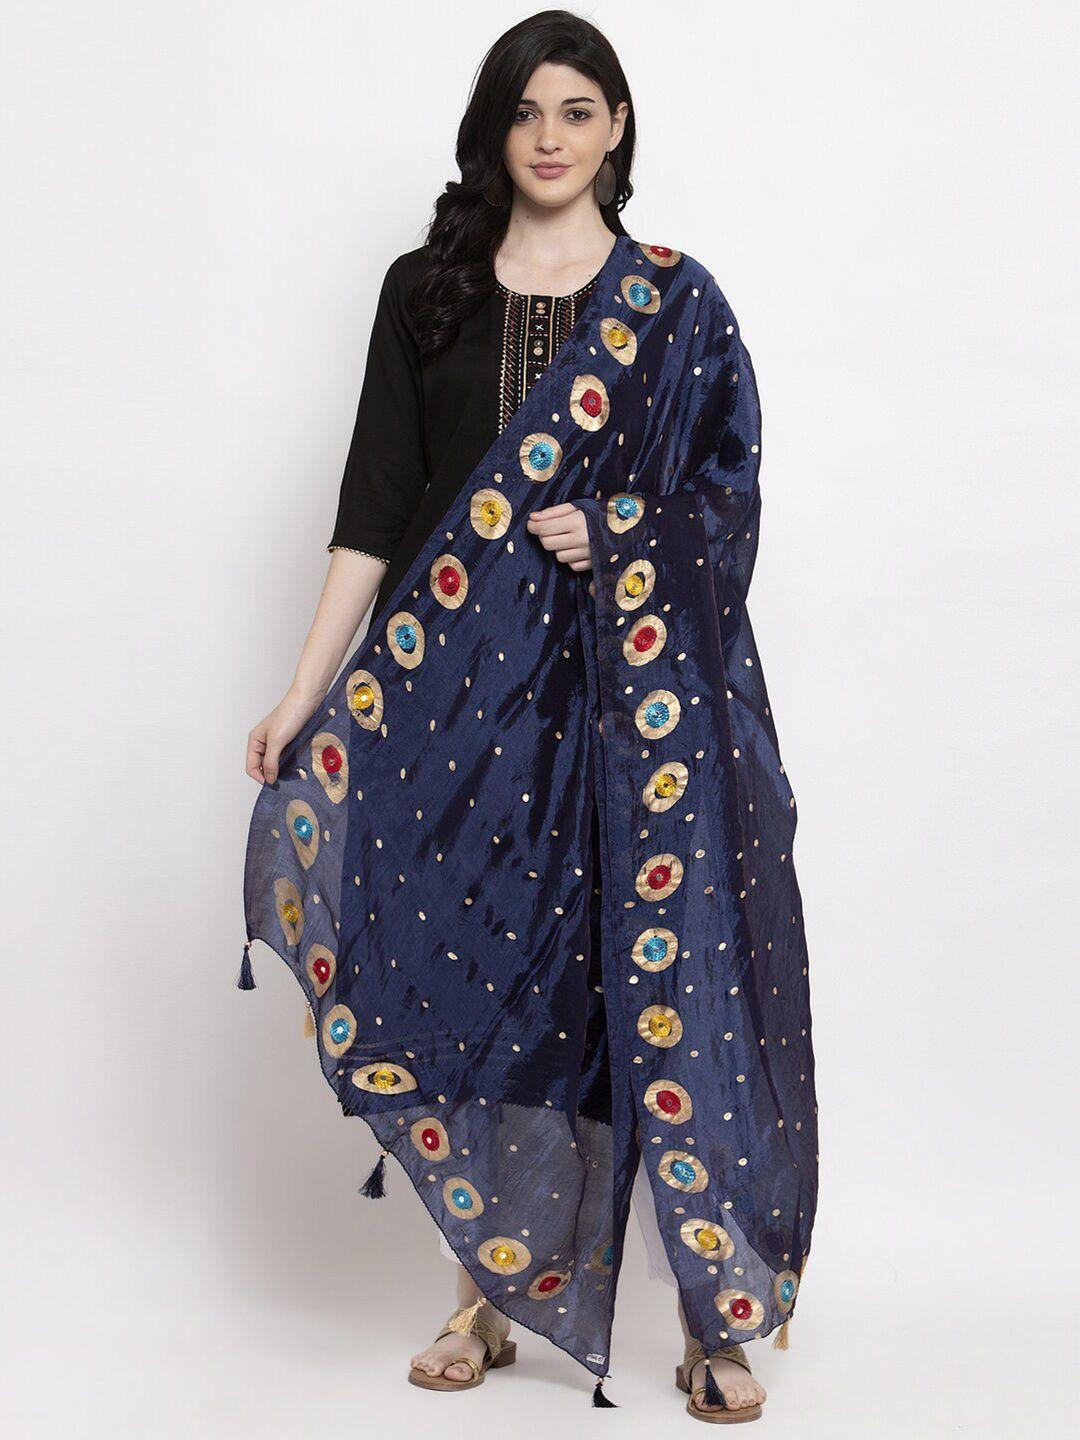 clora-creation-navy-blue-&-gold-toned-printed-dupatta-with-mirror-work